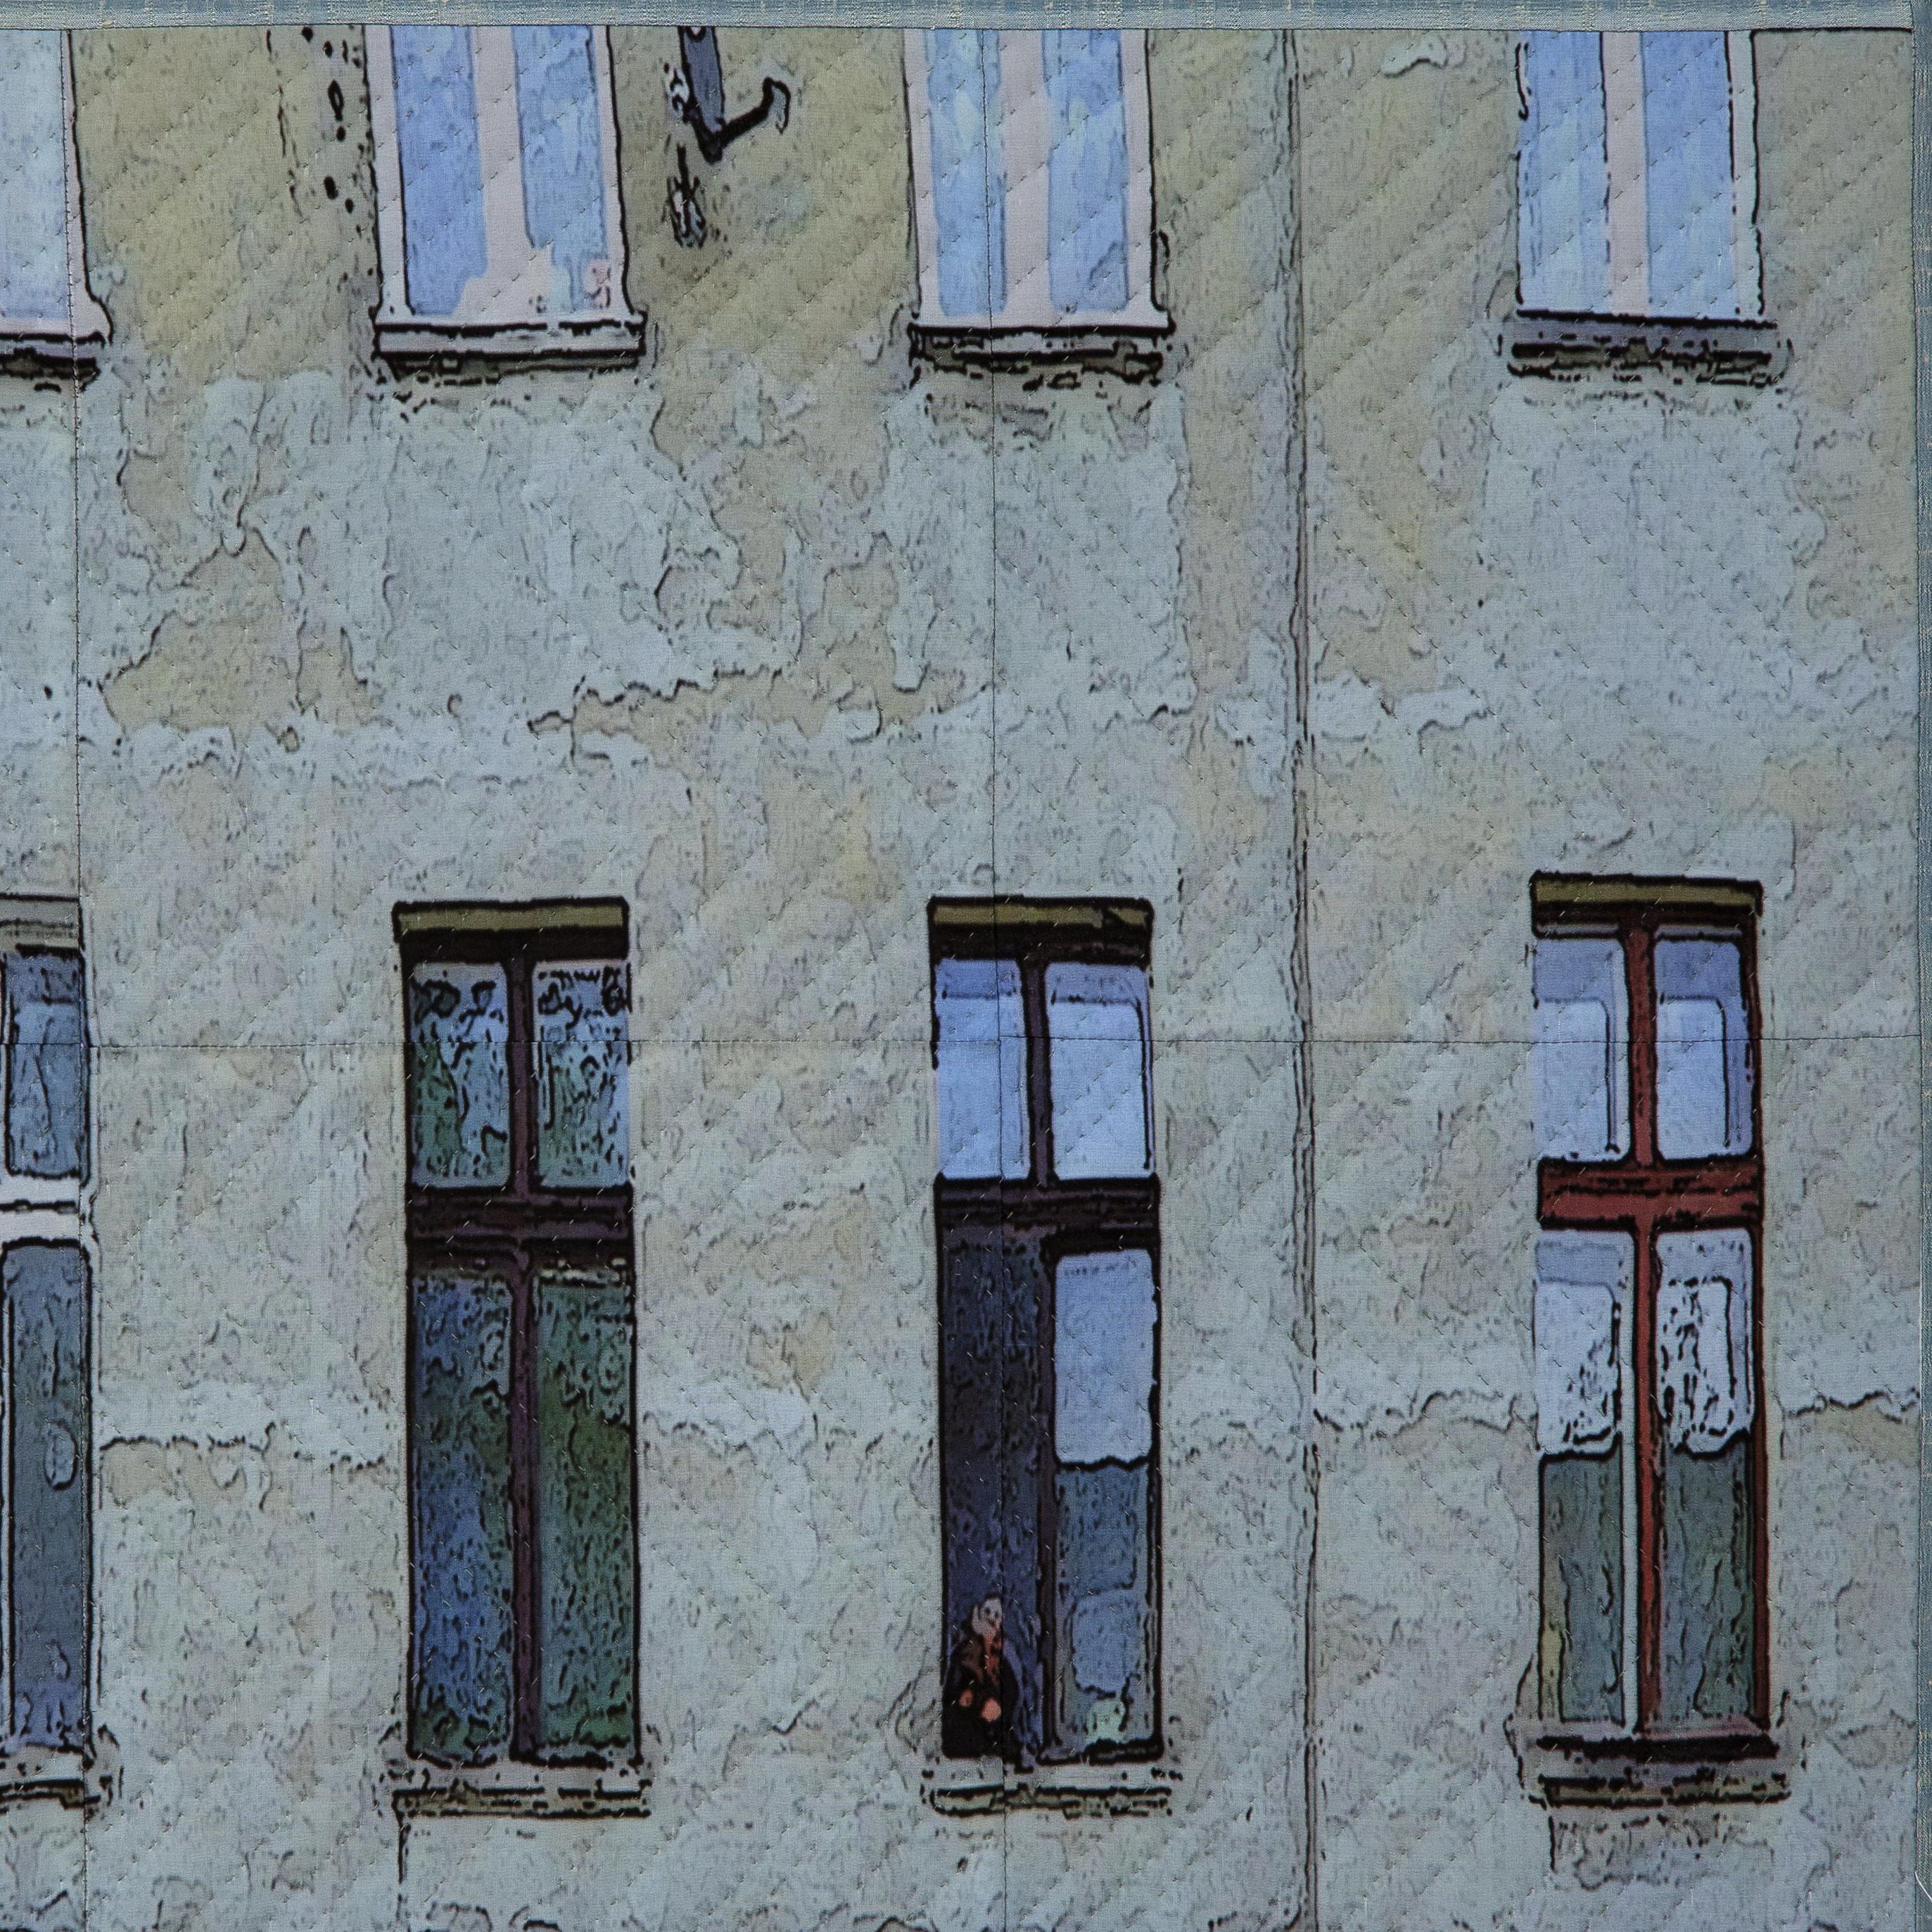 Lodz Windows 1319, Mixed Media on Canvas - Contemporary Mixed Media Art by Marilyn Henrion